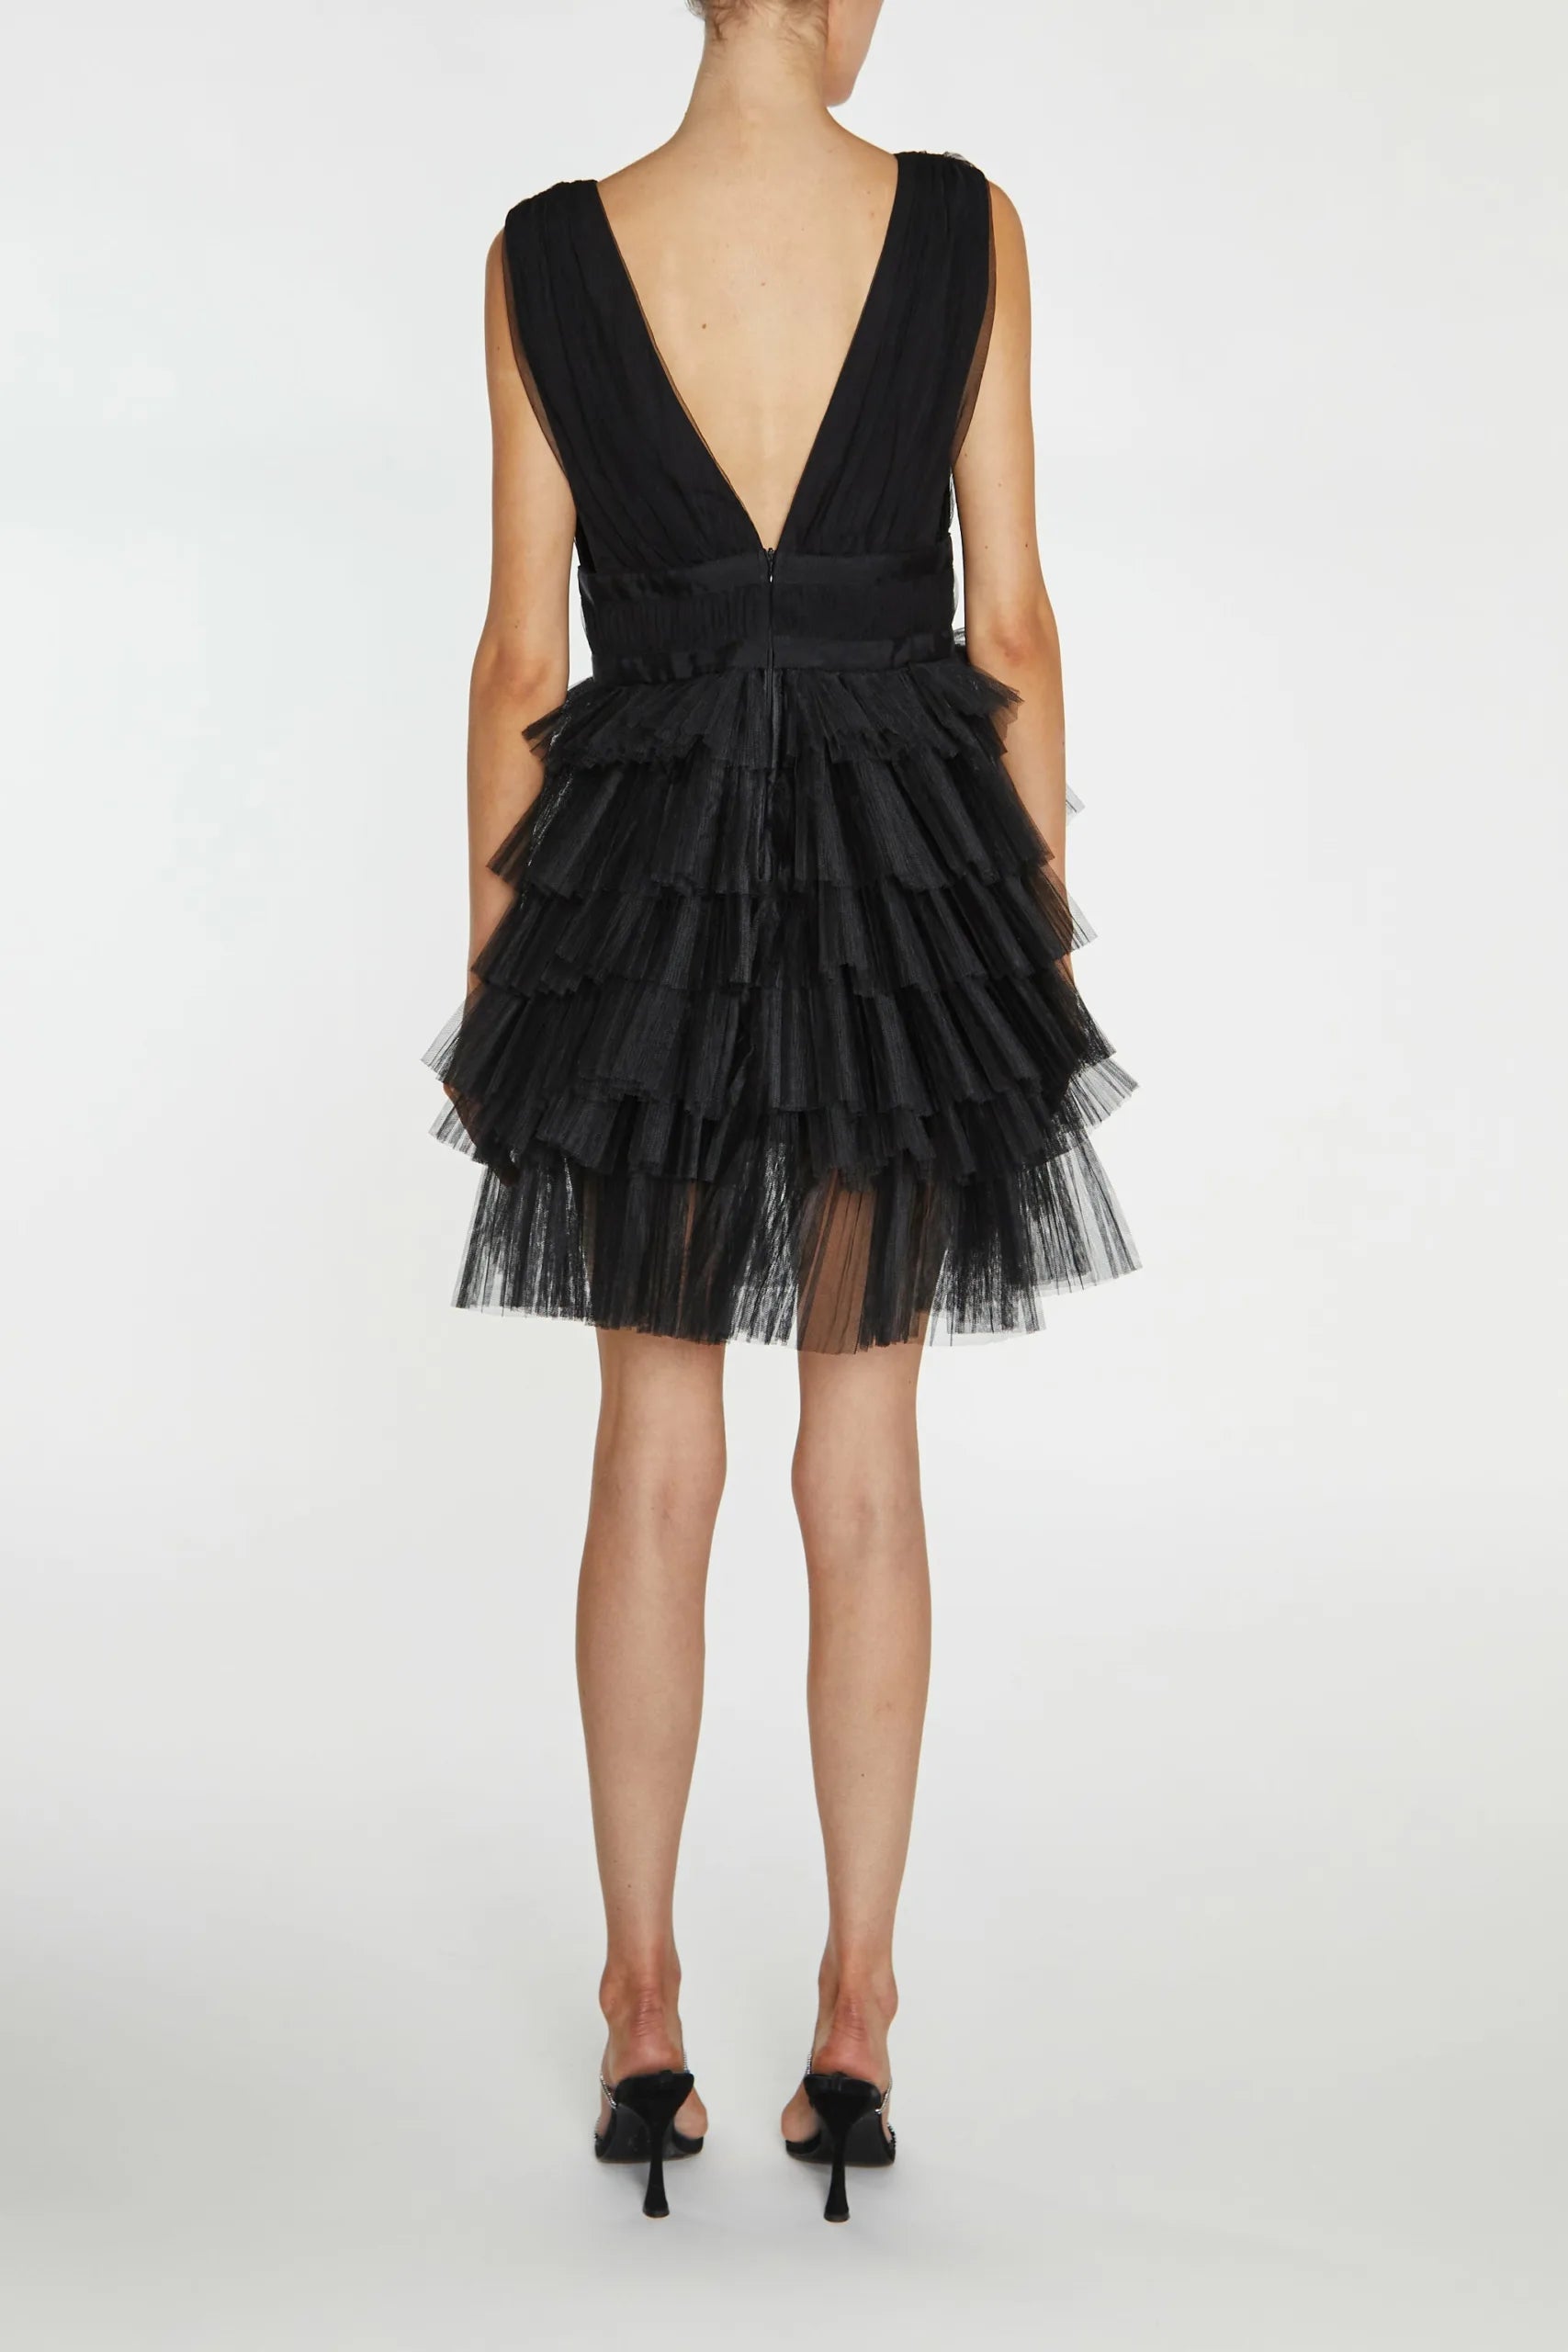 True Decadence Elle Black Plunge-Front Tiered Tulle Mini-Dress